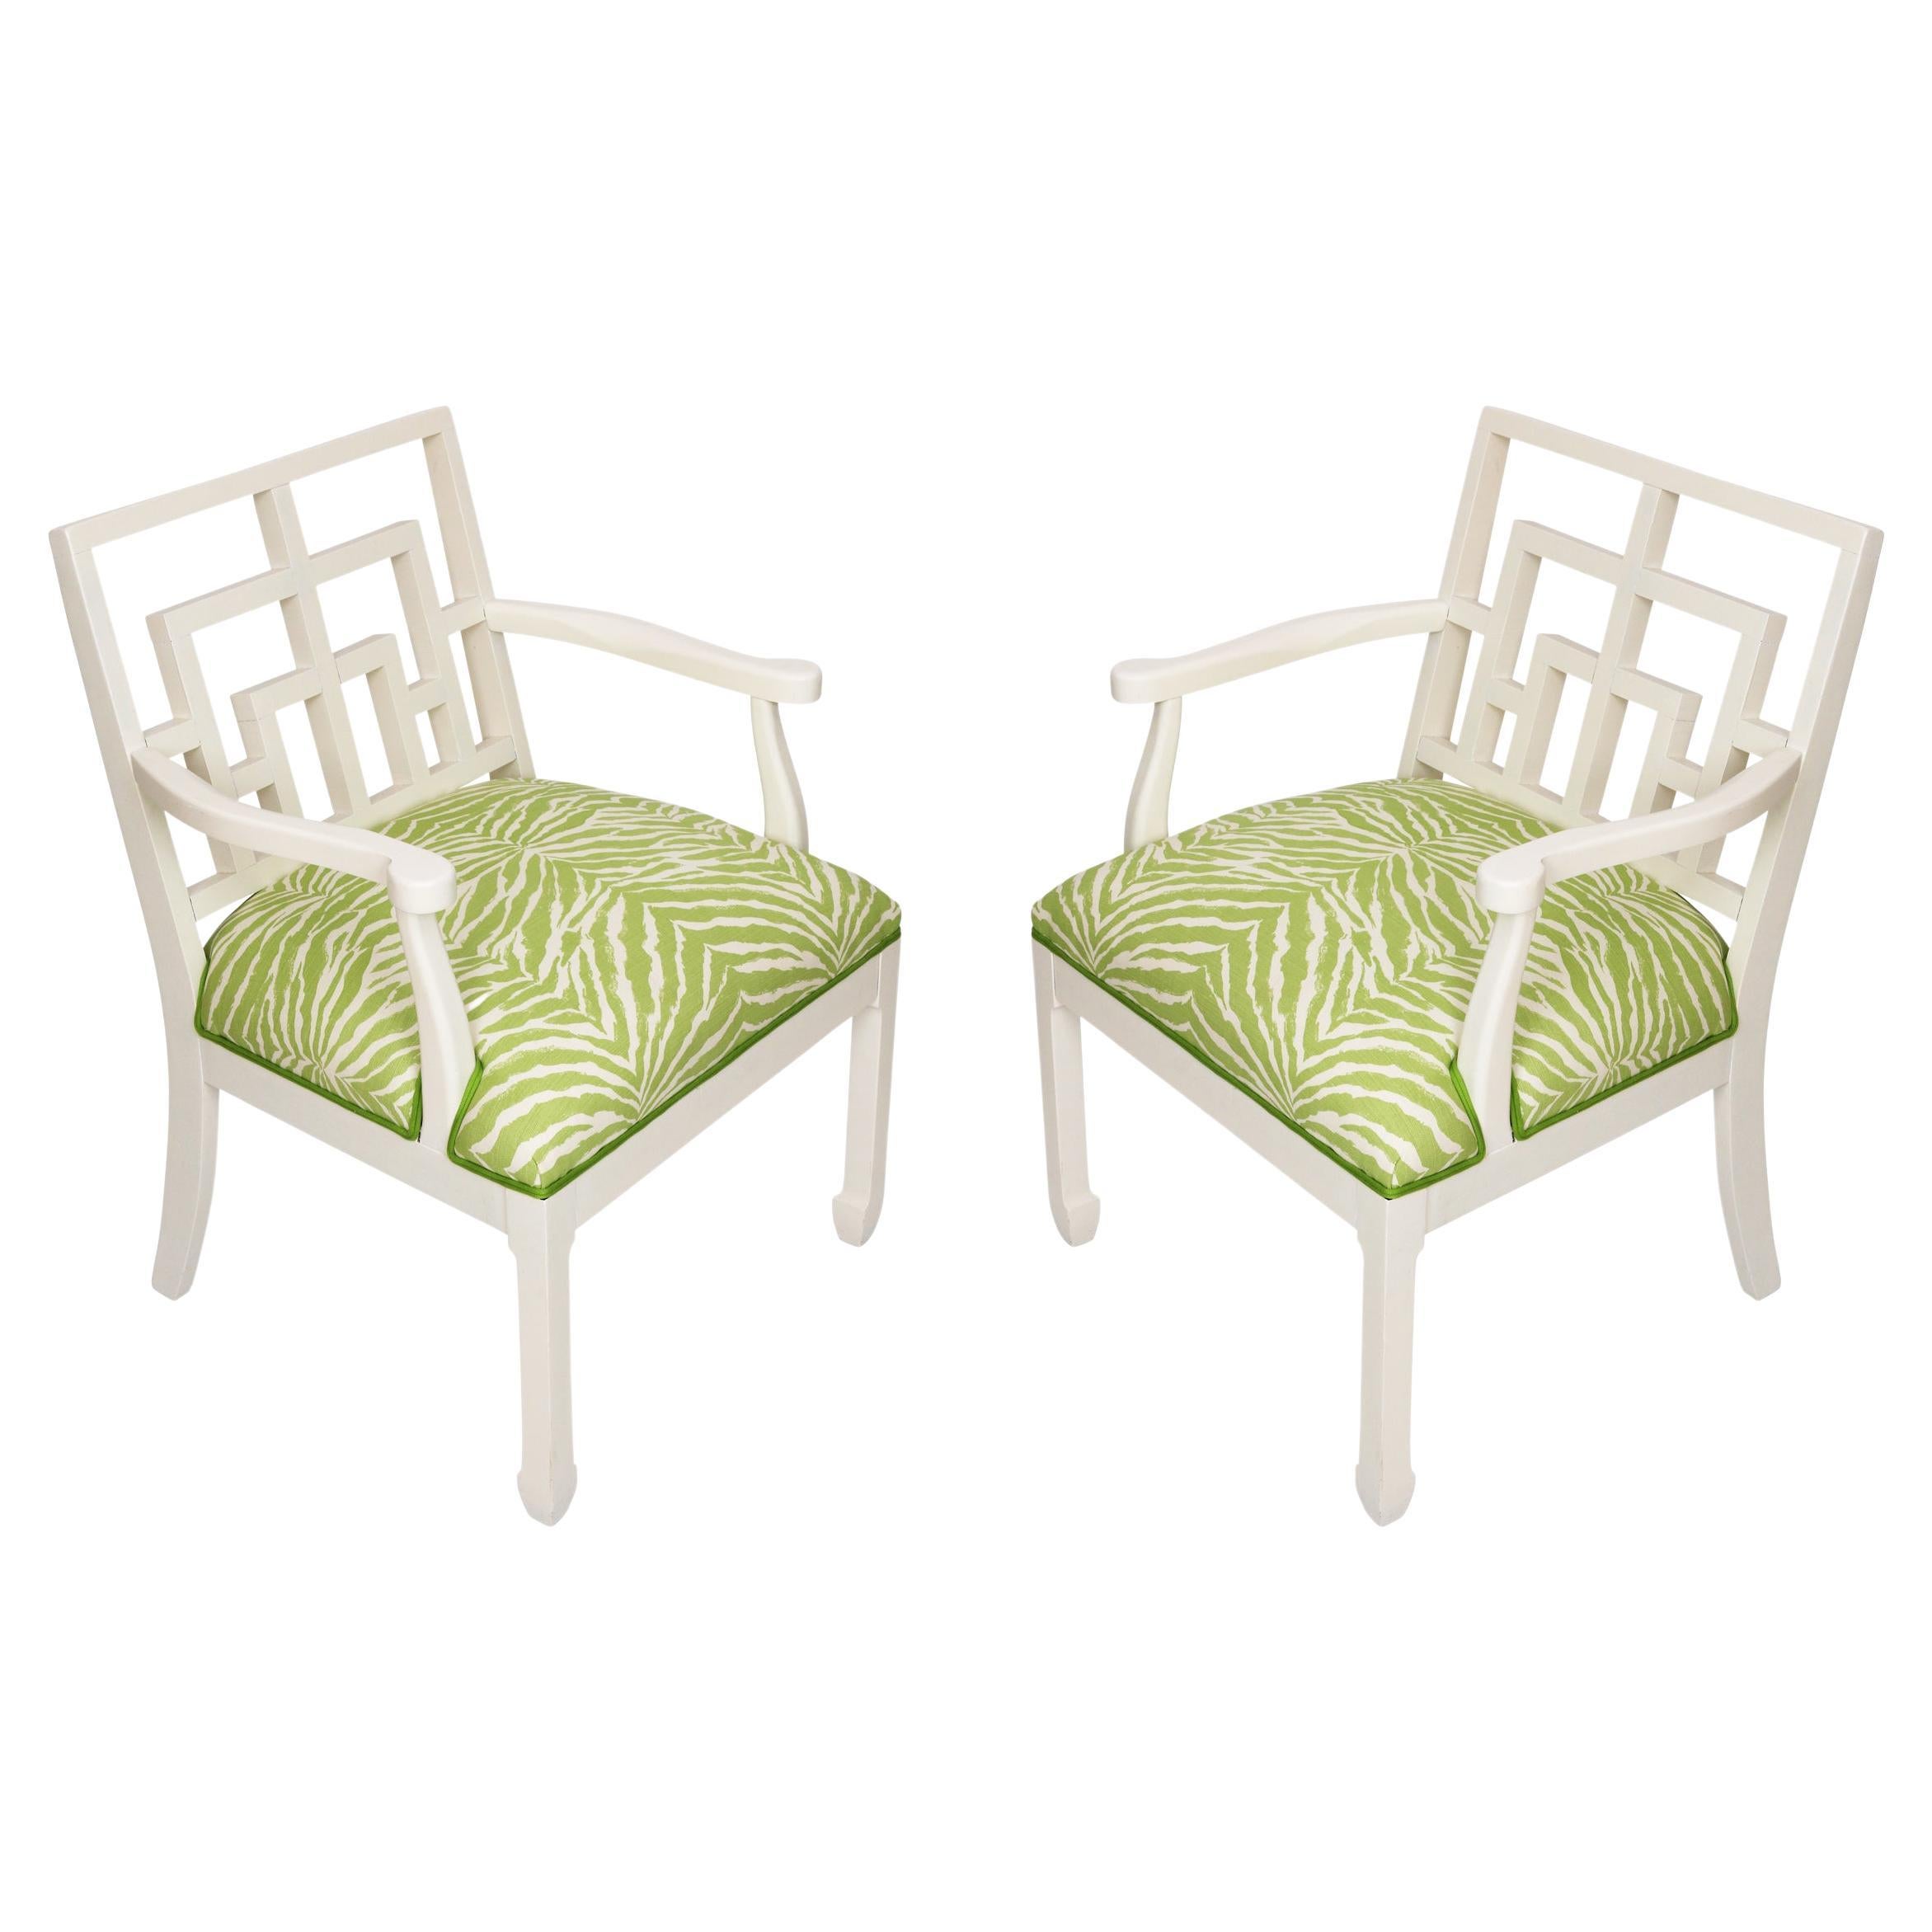 Pair of Hollywood Regency Painted Chair in Quadrille Green Zebra Fabric